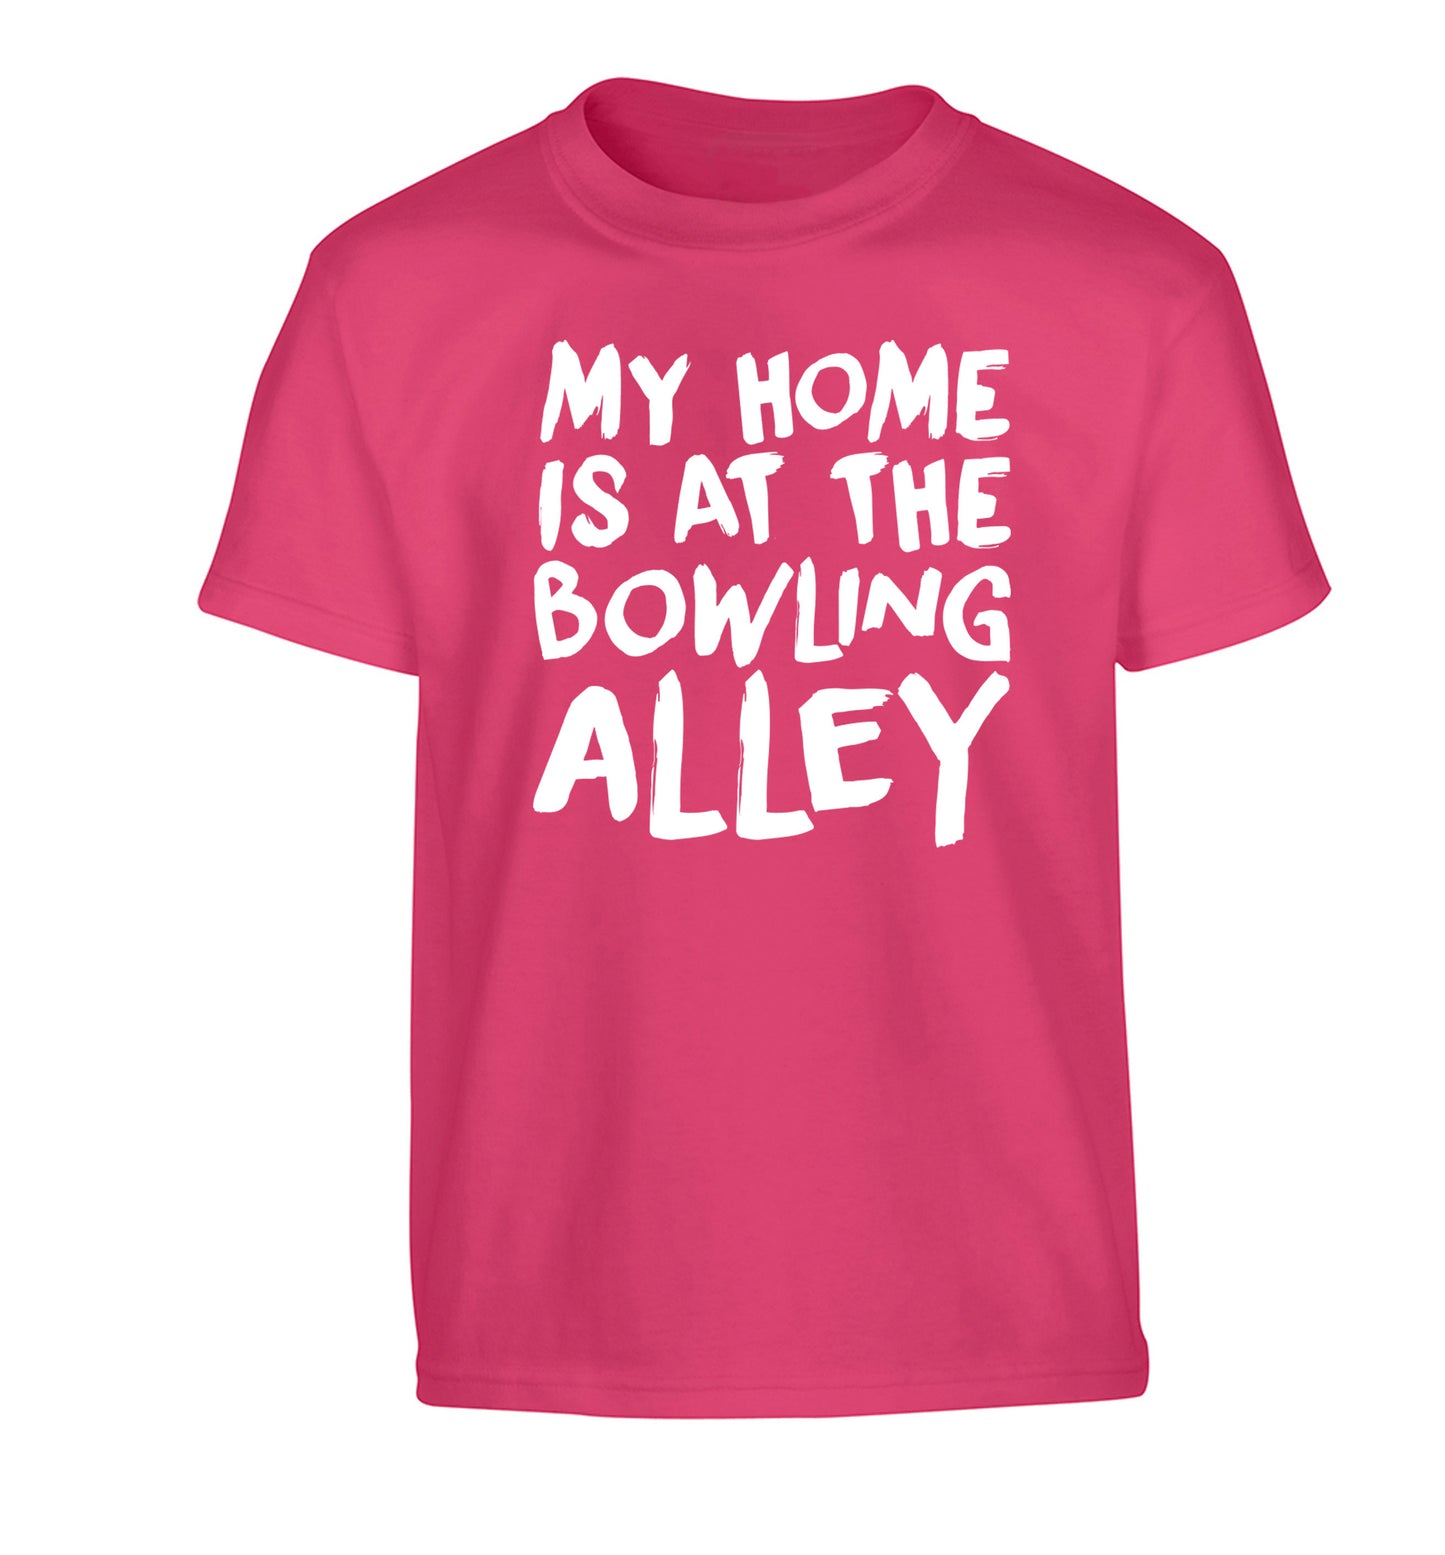 My home is at the bowling alley Children's pink Tshirt 12-14 Years